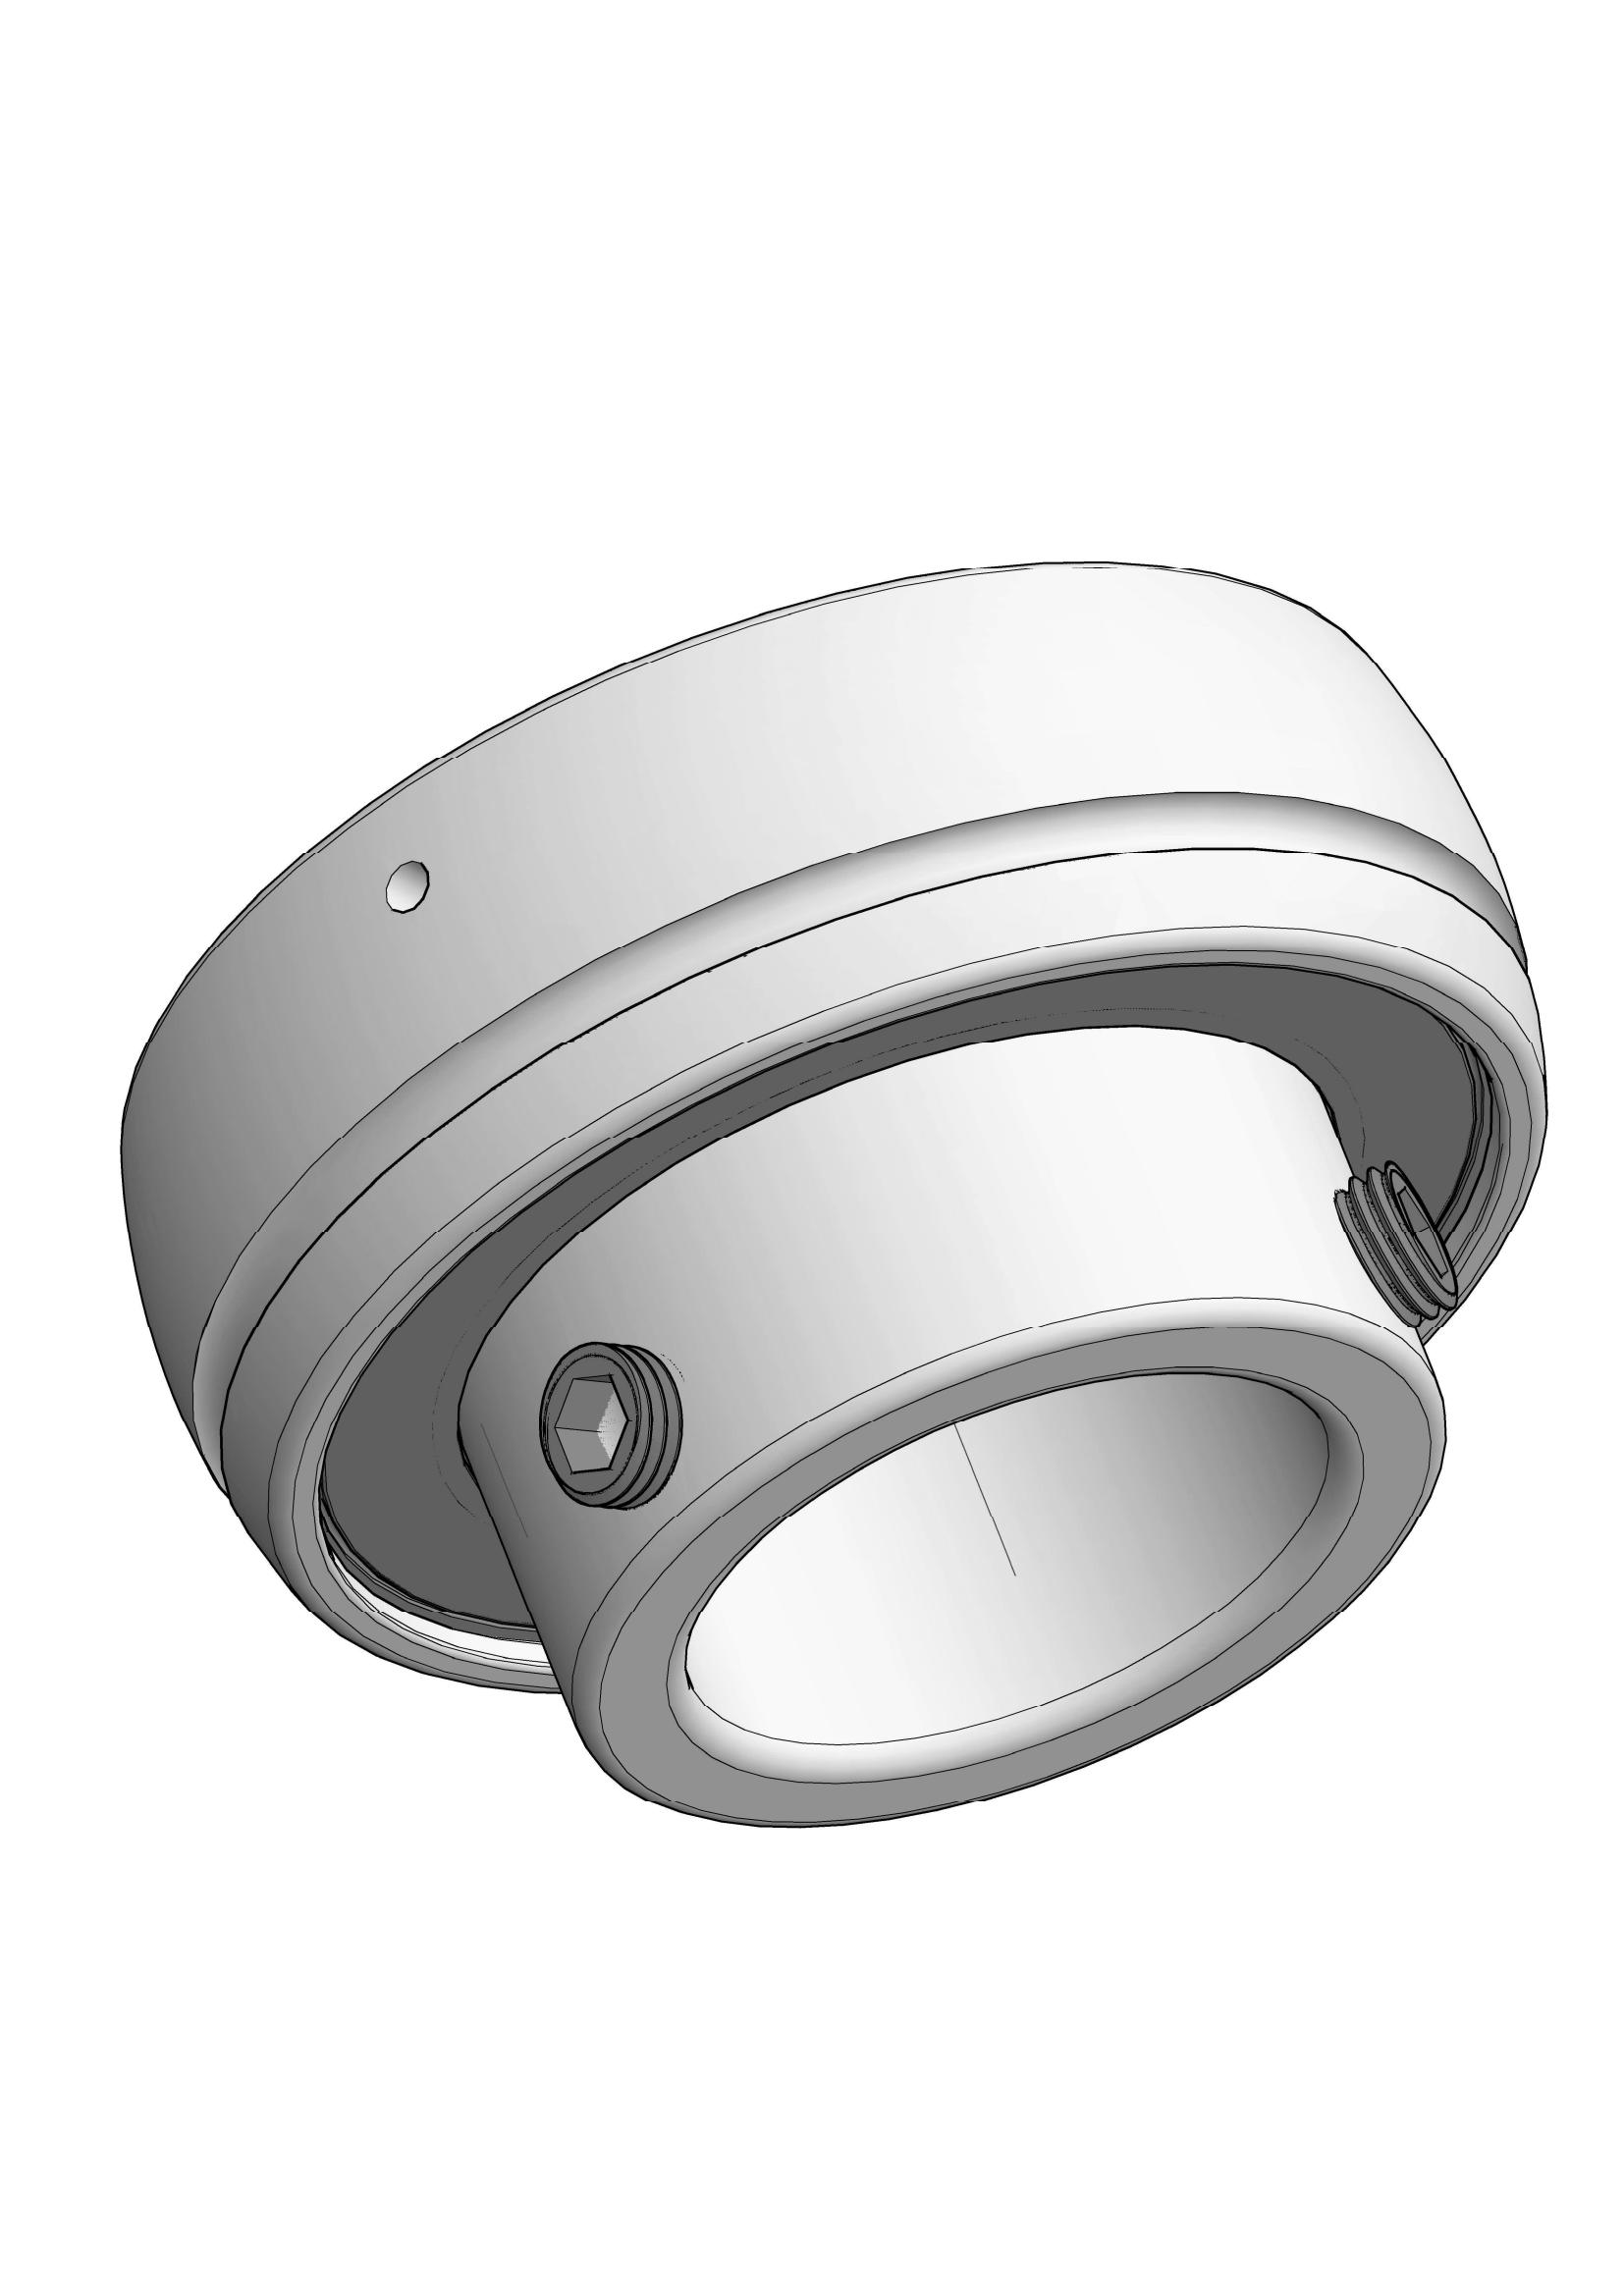 SB204 insert ball bearings with Eccentric Collar Lock with 20mm Bore